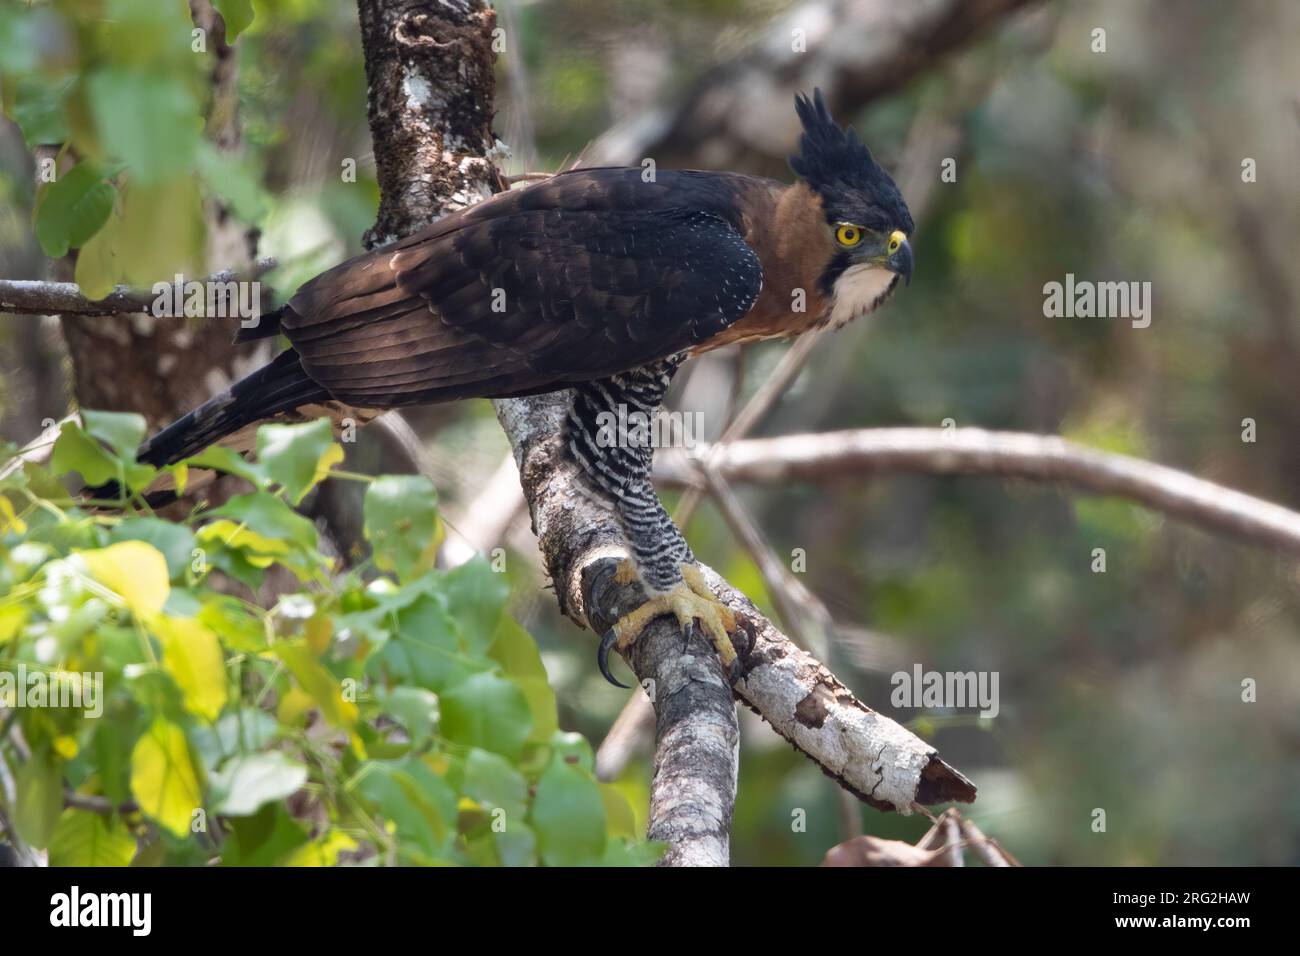 Ornate Hawk-Eagle (Spizaetus ornatus) perched on a branch in a rainforest in Guatemala. Stock Photo